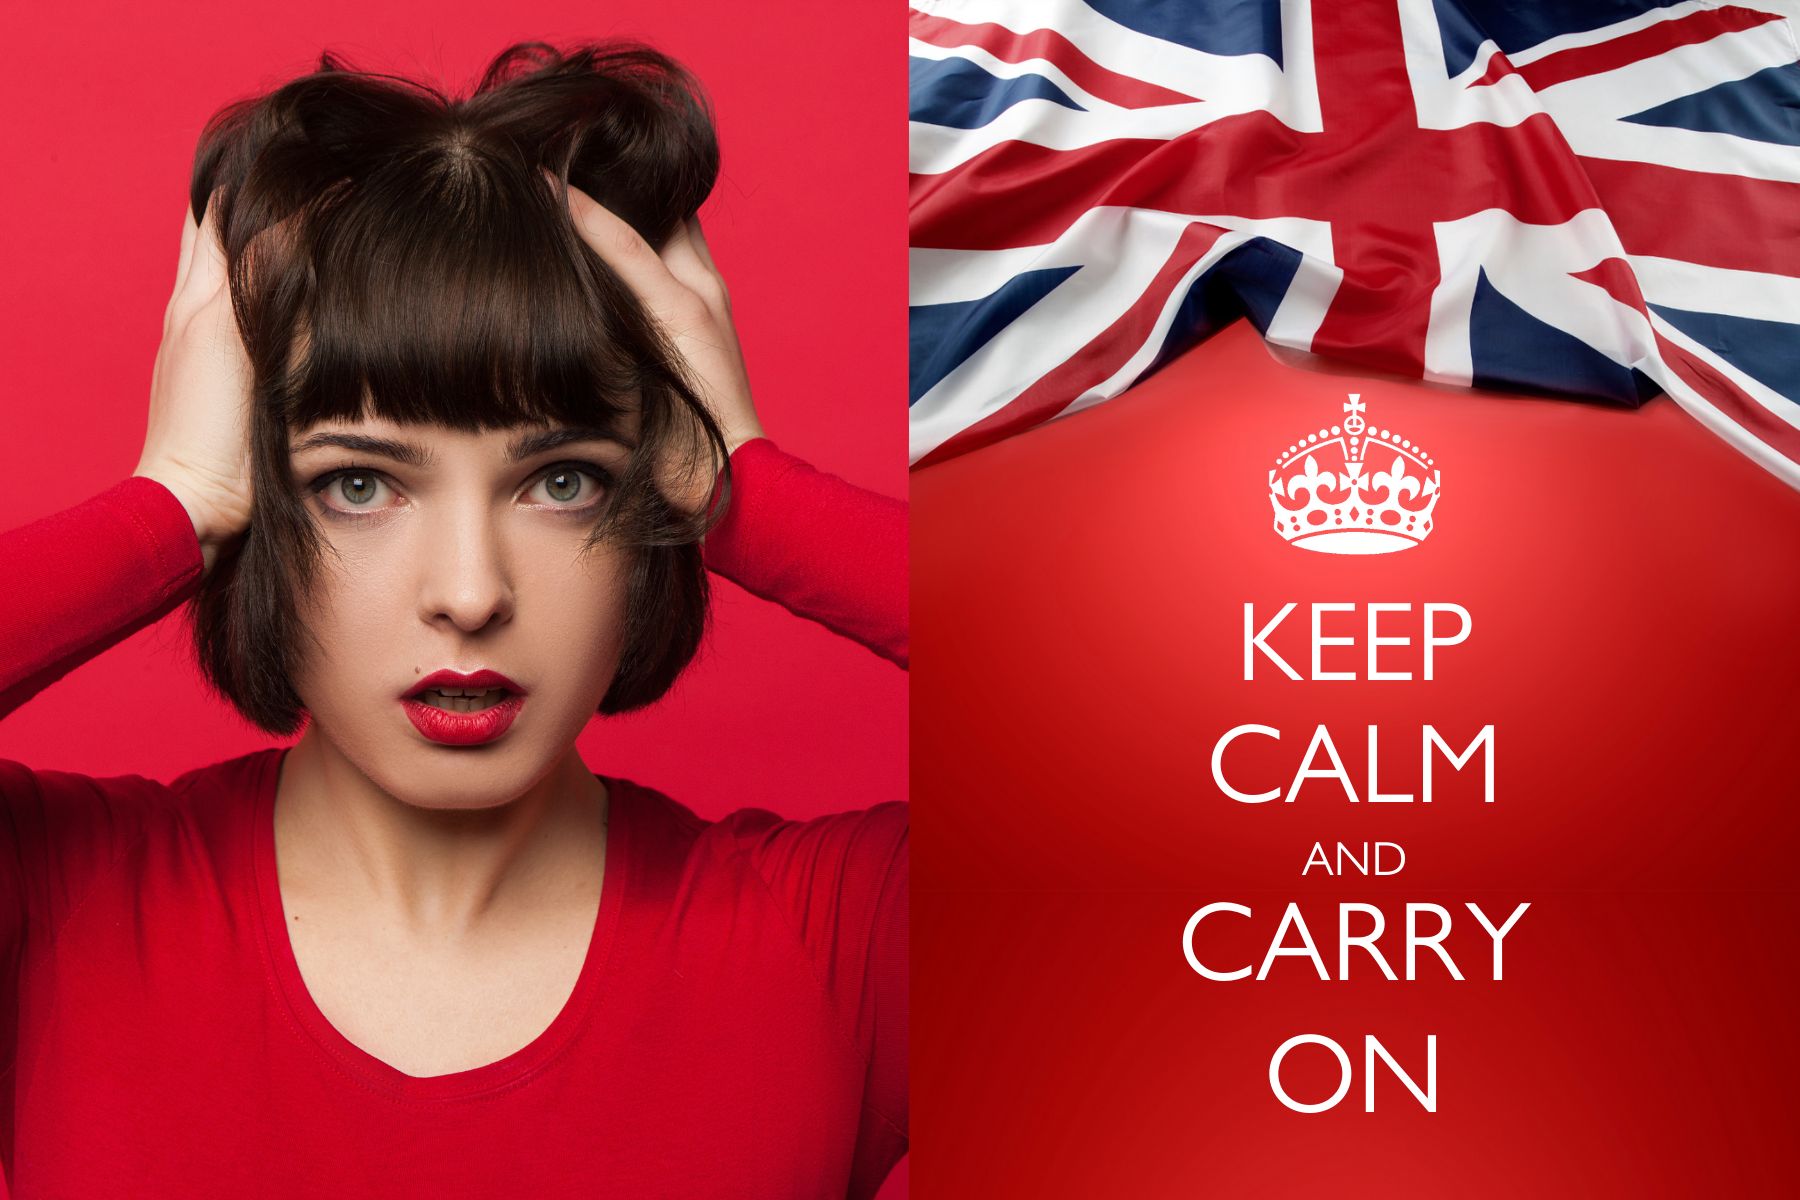 Woman looking worried then message 'Keep Calm and Carry On'